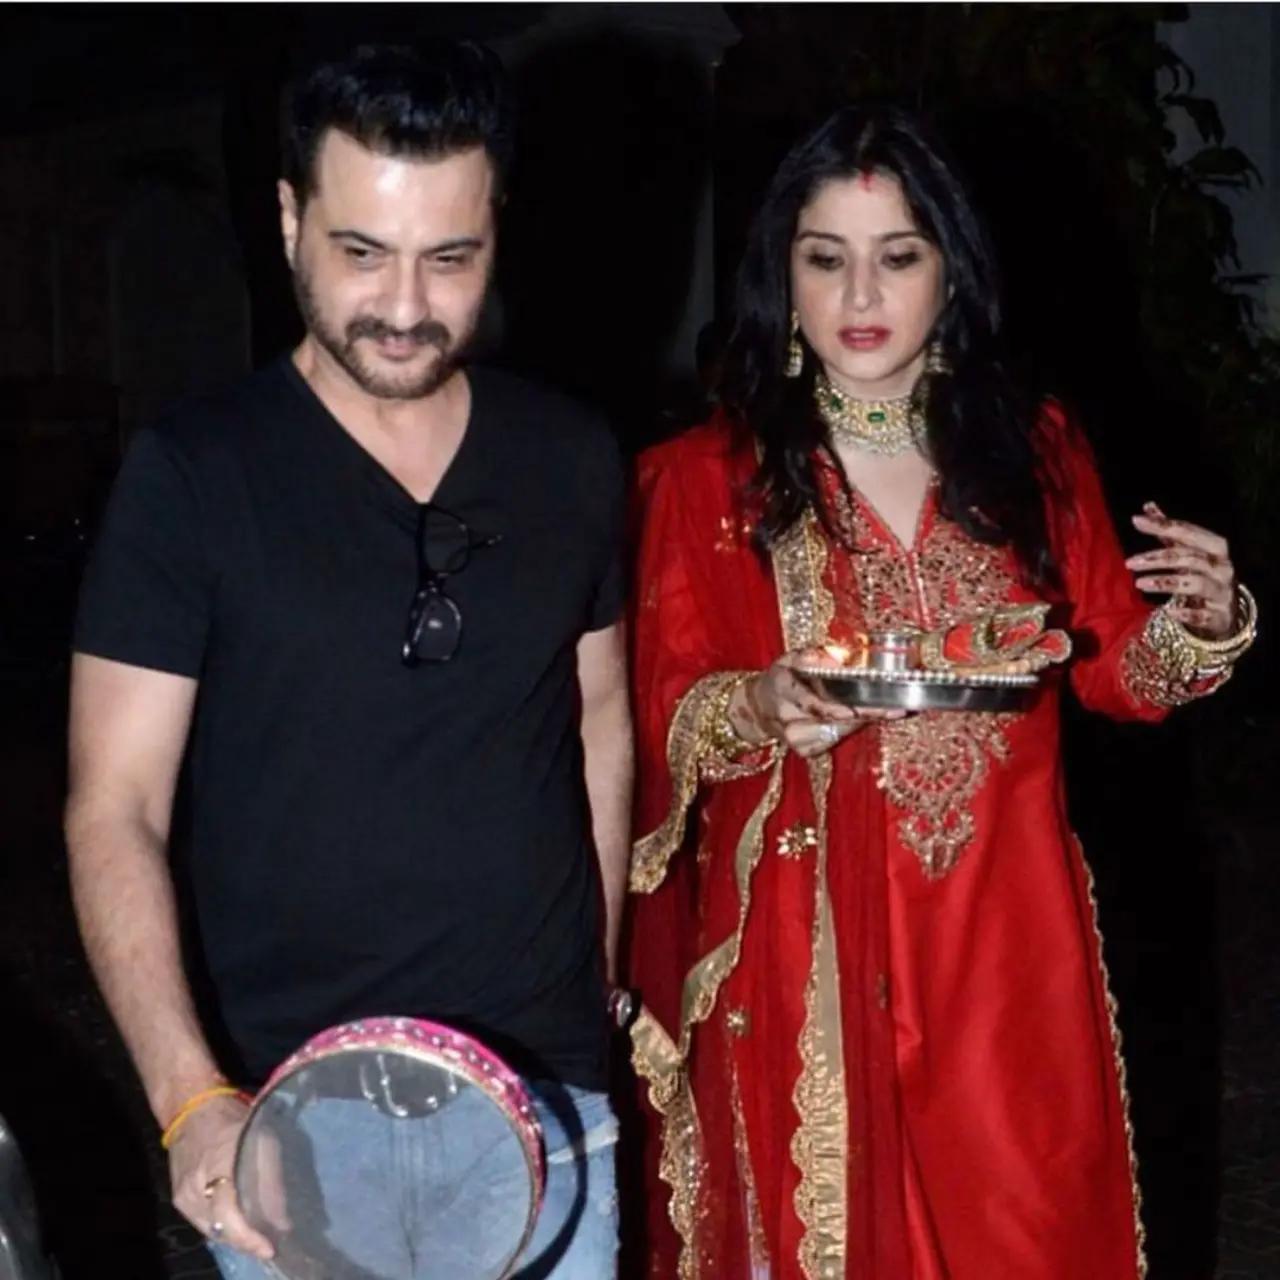 Maheep Kapoor has also been an avid celebrator of Karwa Chauth. She took to her Instagram handle to post this throwback with her husband Sanjay Kapoor in 2022